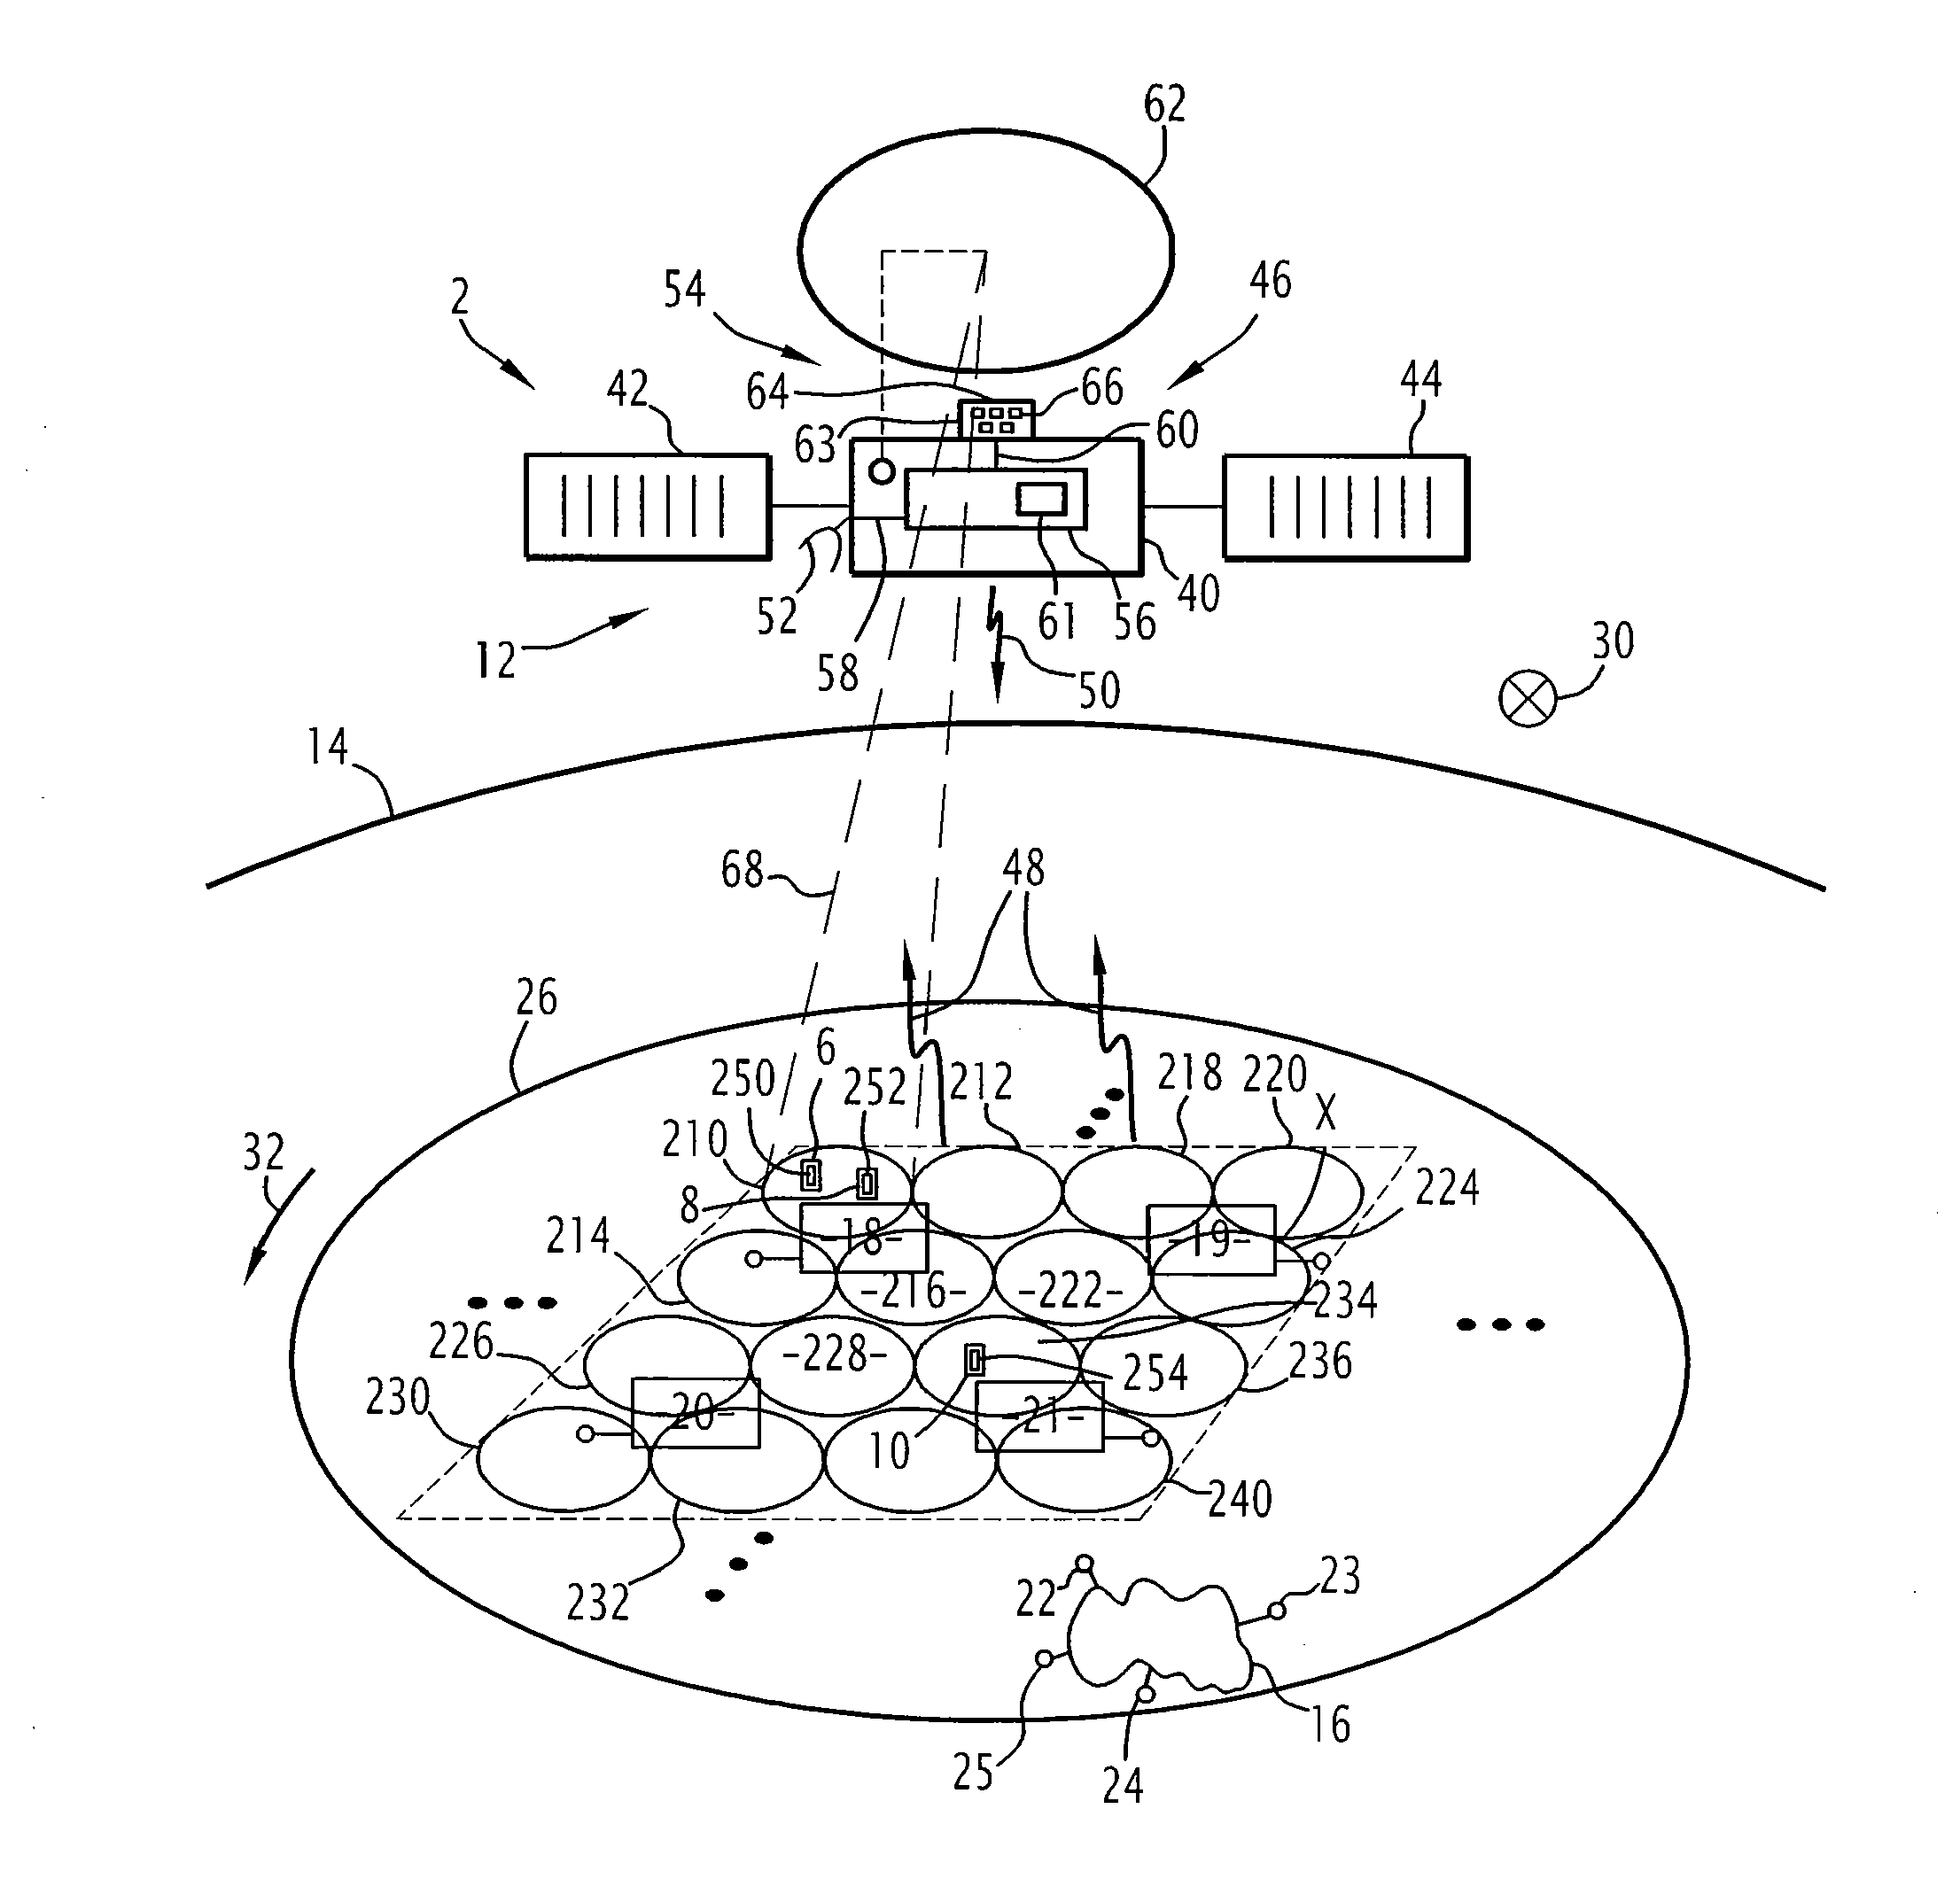 Multi-beam telecommunication antenna onboard a high-capacity satellite and related telecommunication system